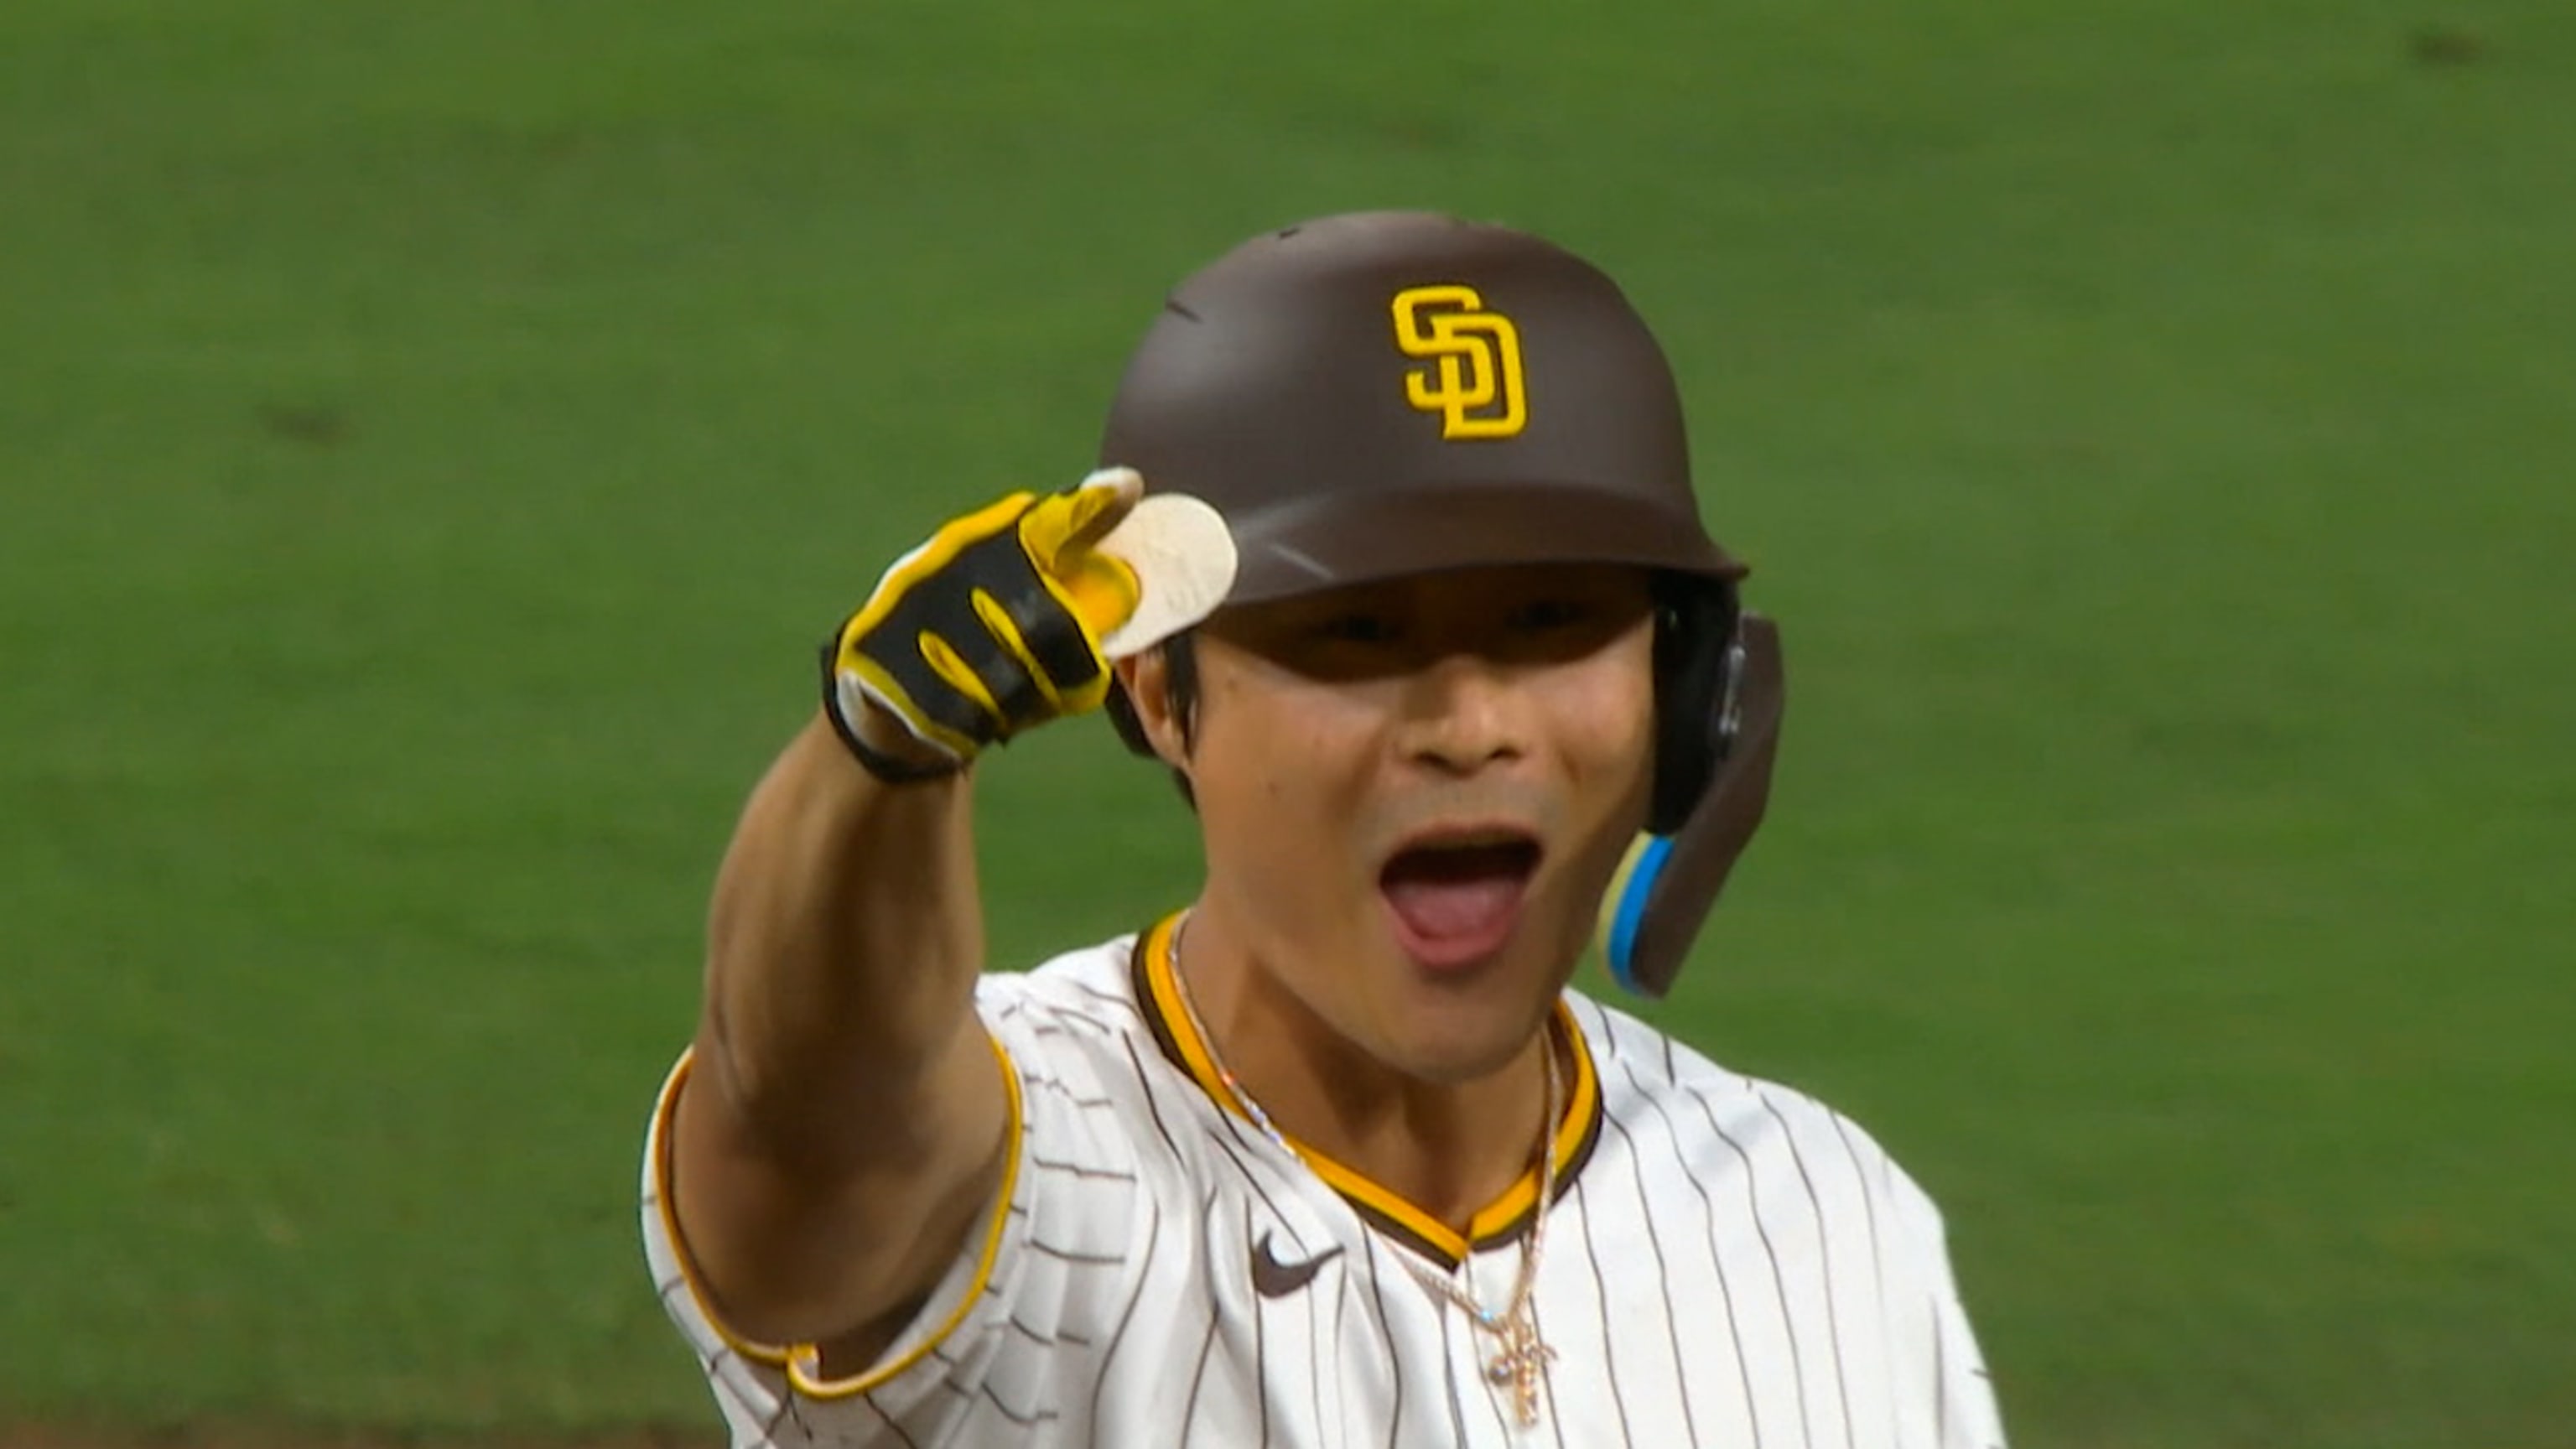 Padres win National League Division Series 2022